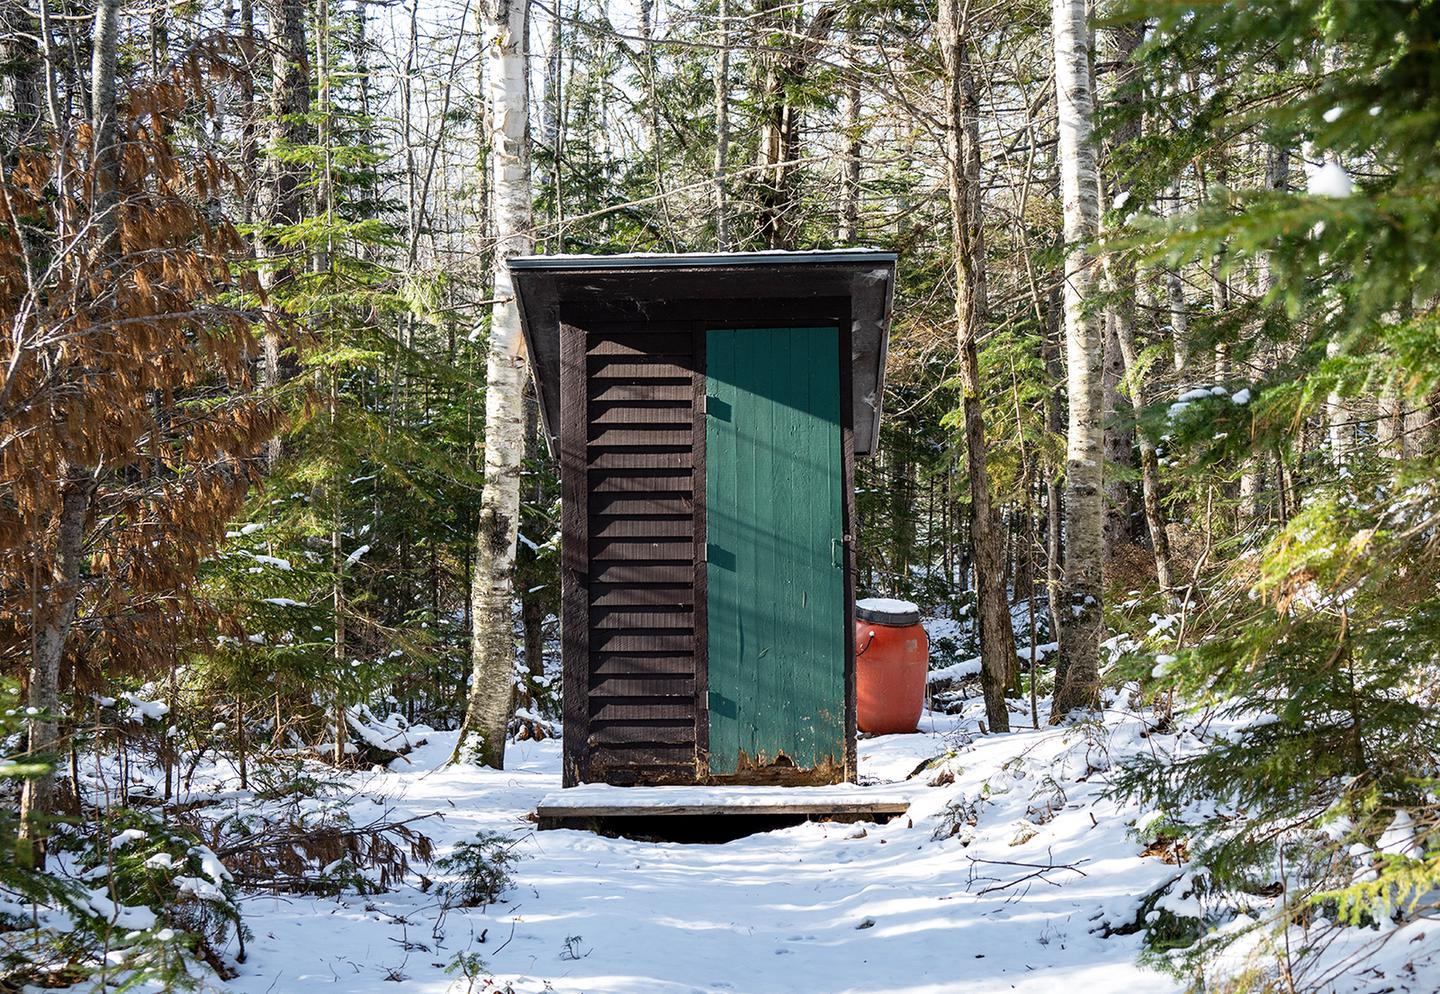 A tall wooden rectangular shack like structure with a green door. Snow is on the trail that leads to the single outhouse in the woods.An outhouse is available just outside of Haskell Hut.